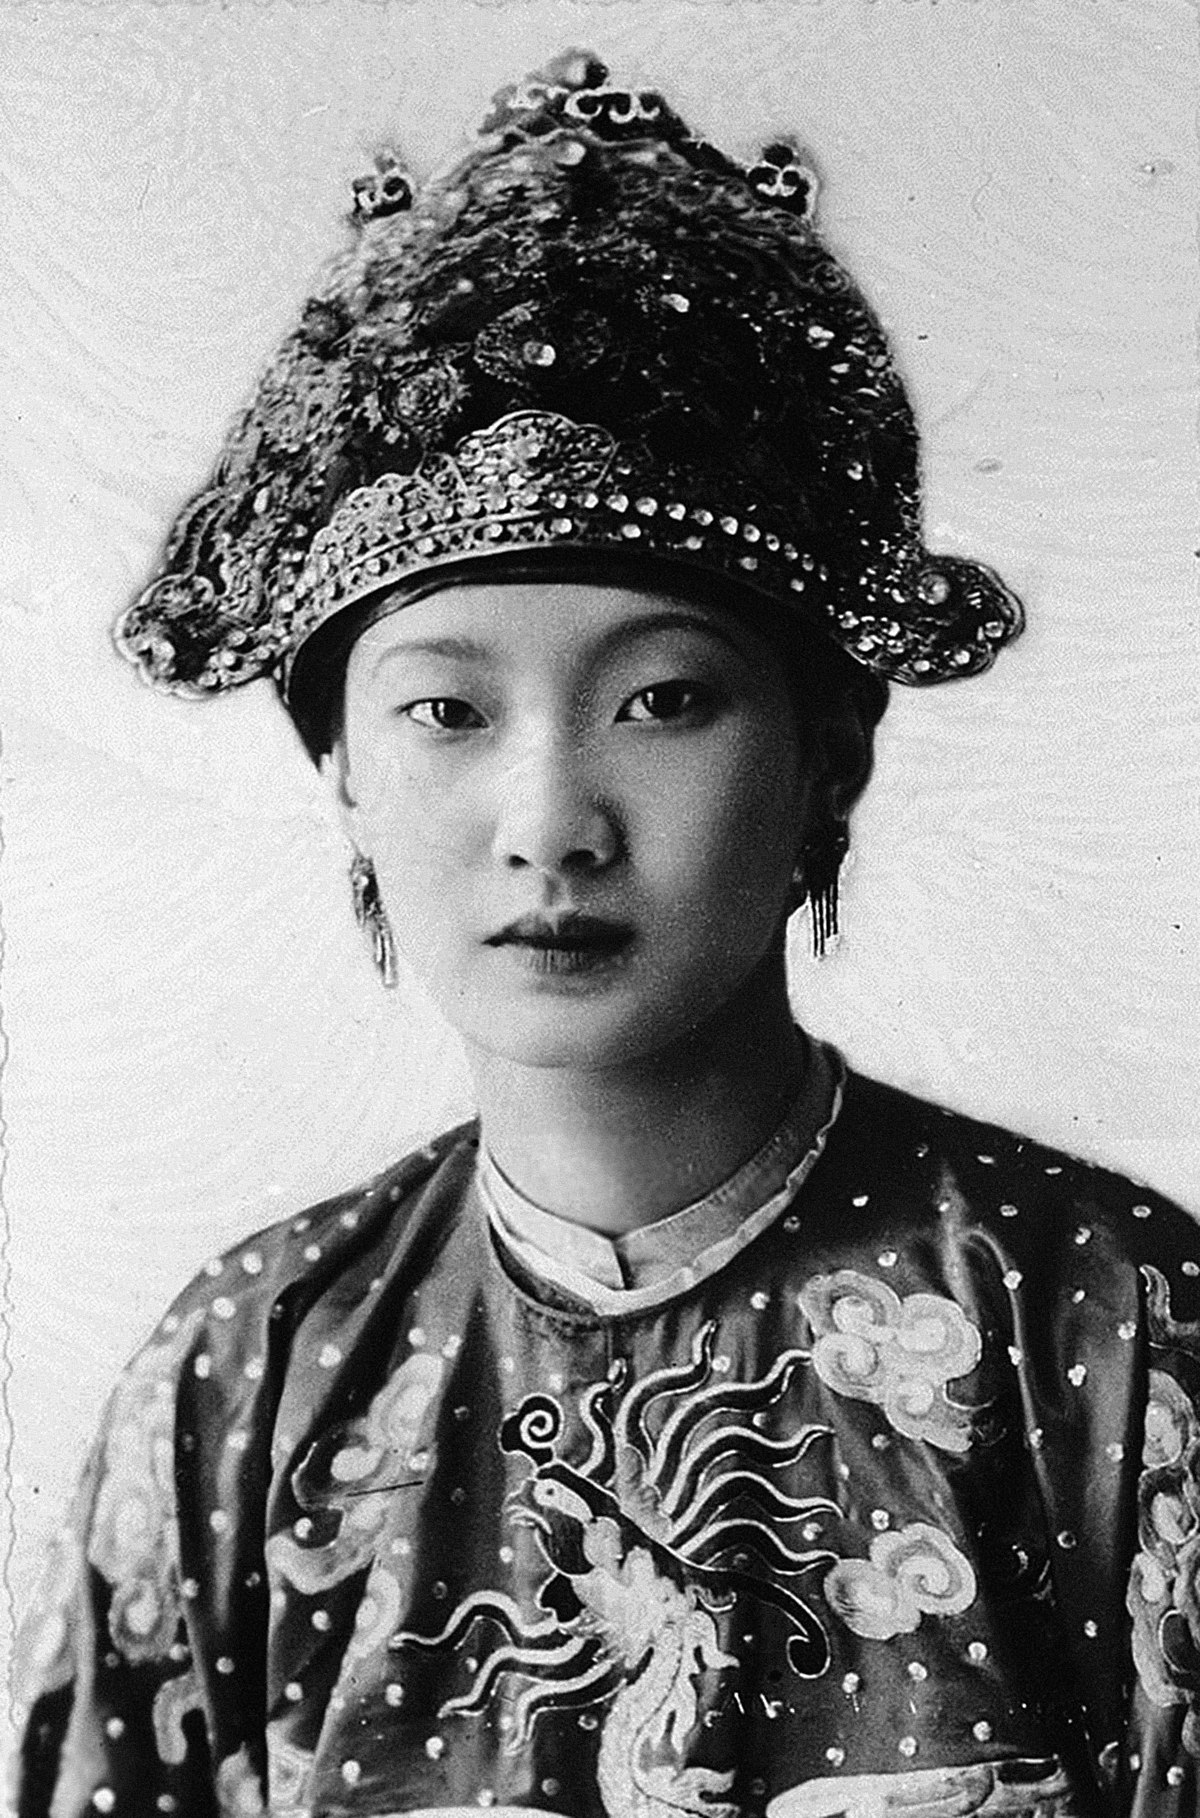 1200px-portrait_of_empress_nam_phuong_during_her_wedding_day_1934.jpg